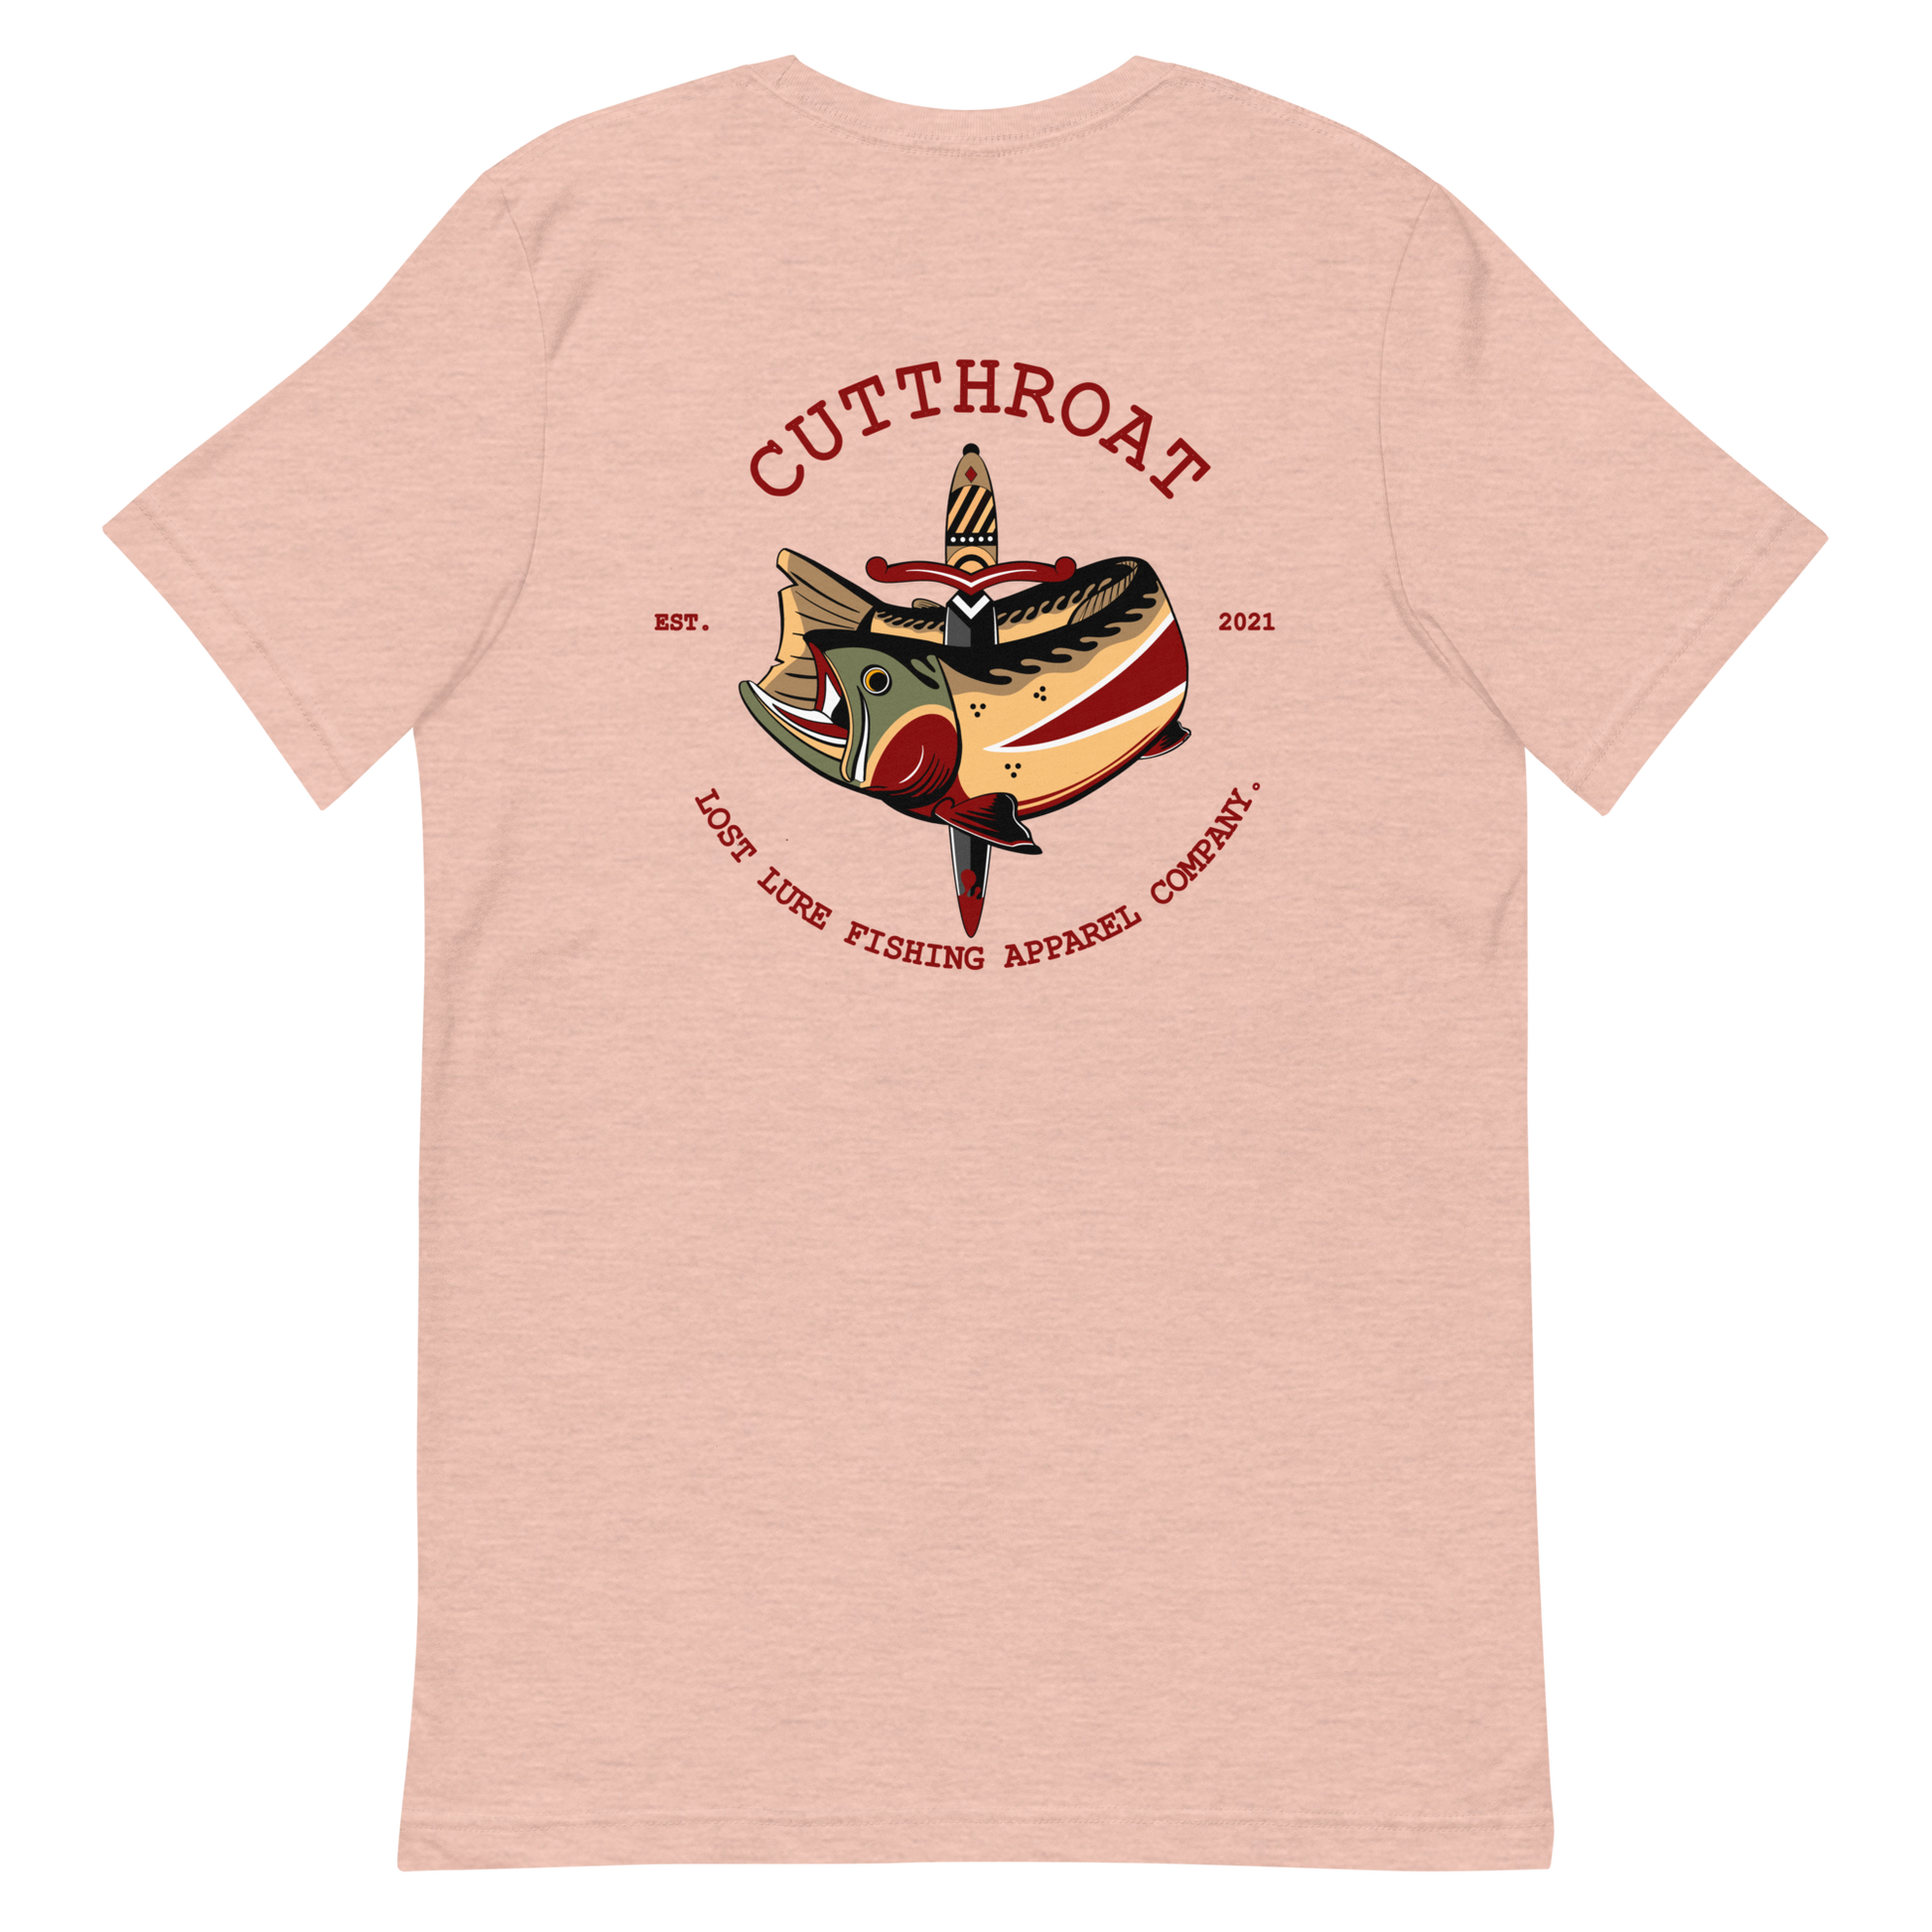 Cutthroat Trout fishing shirt. It’s an American traditional style design with a cutthroat trout and a dagger. The shirt reads Cutthroat trout, est. 2021, lost lure fishing apparel company. The front of the shirt has the lost lure logo. Salmon colored fishing shirt, back side